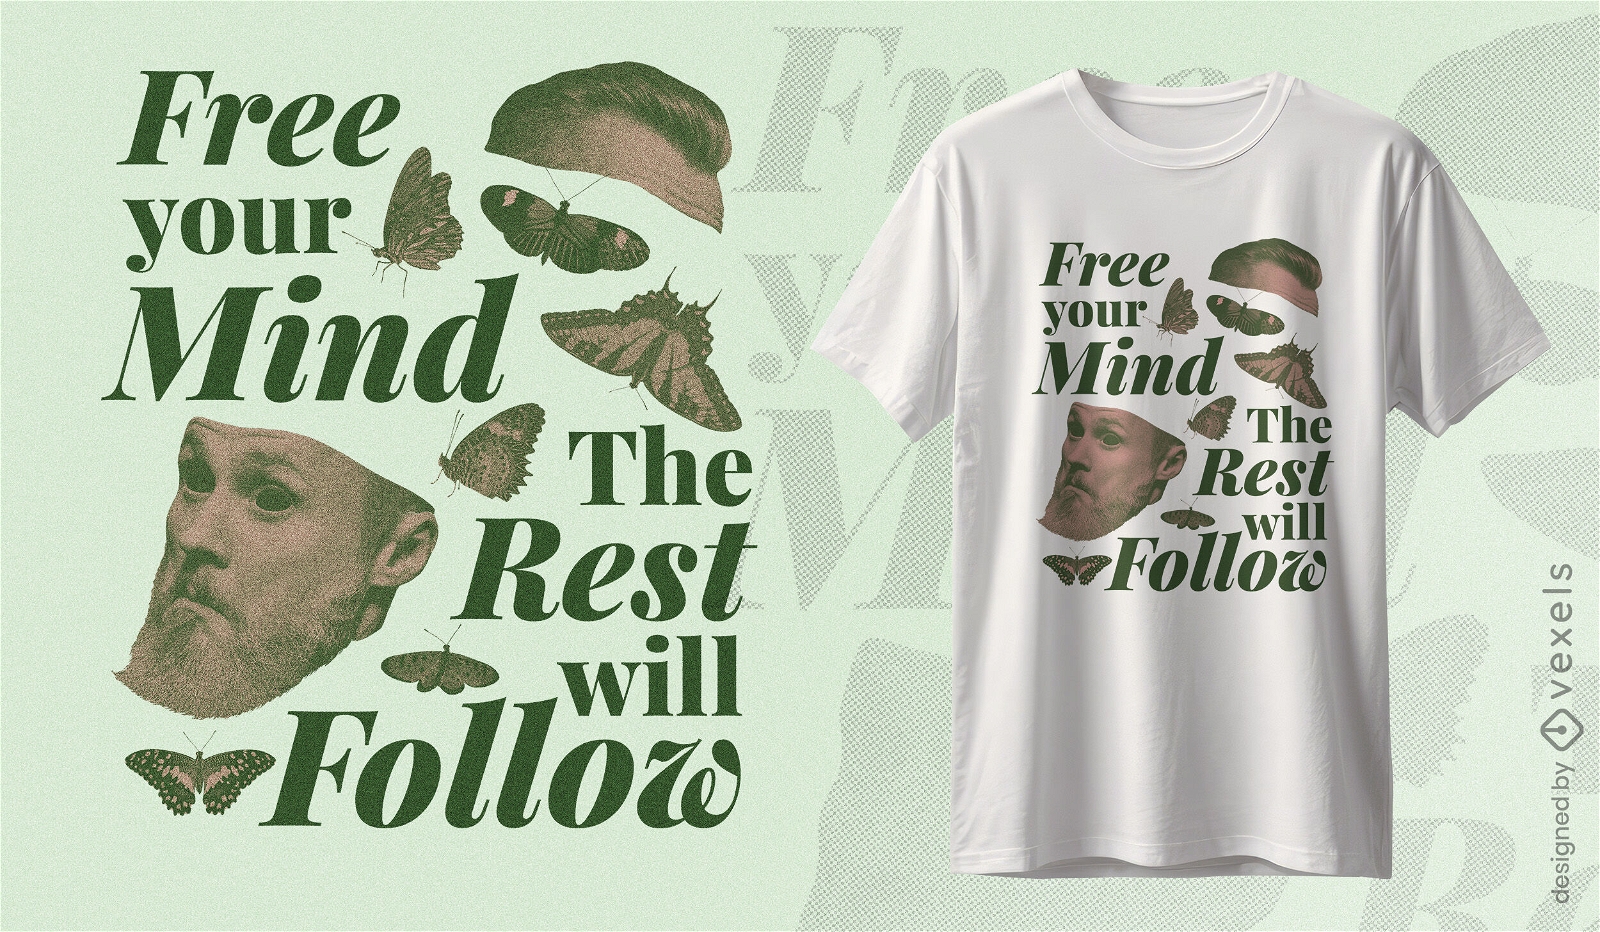 Free your mind the rest will follow t-shirt design